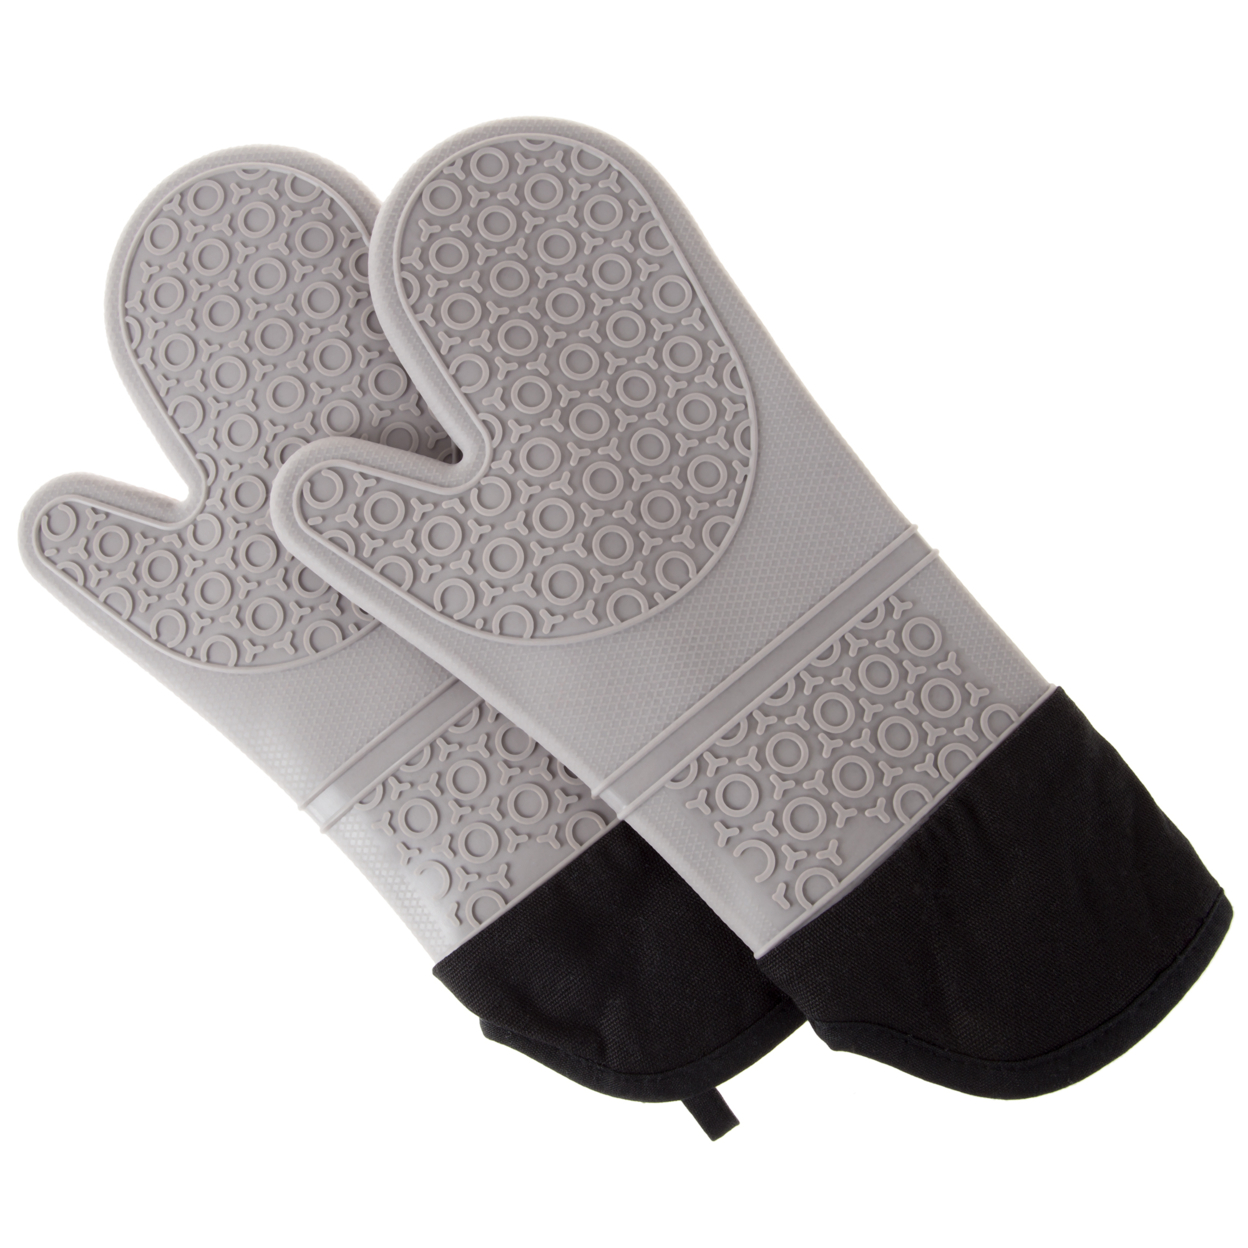 Silicone Oven Mits Extra Long Professional Quality Heat Resistant With Quilted Lining And 2-sided Textured Grip 1 Pair Gray